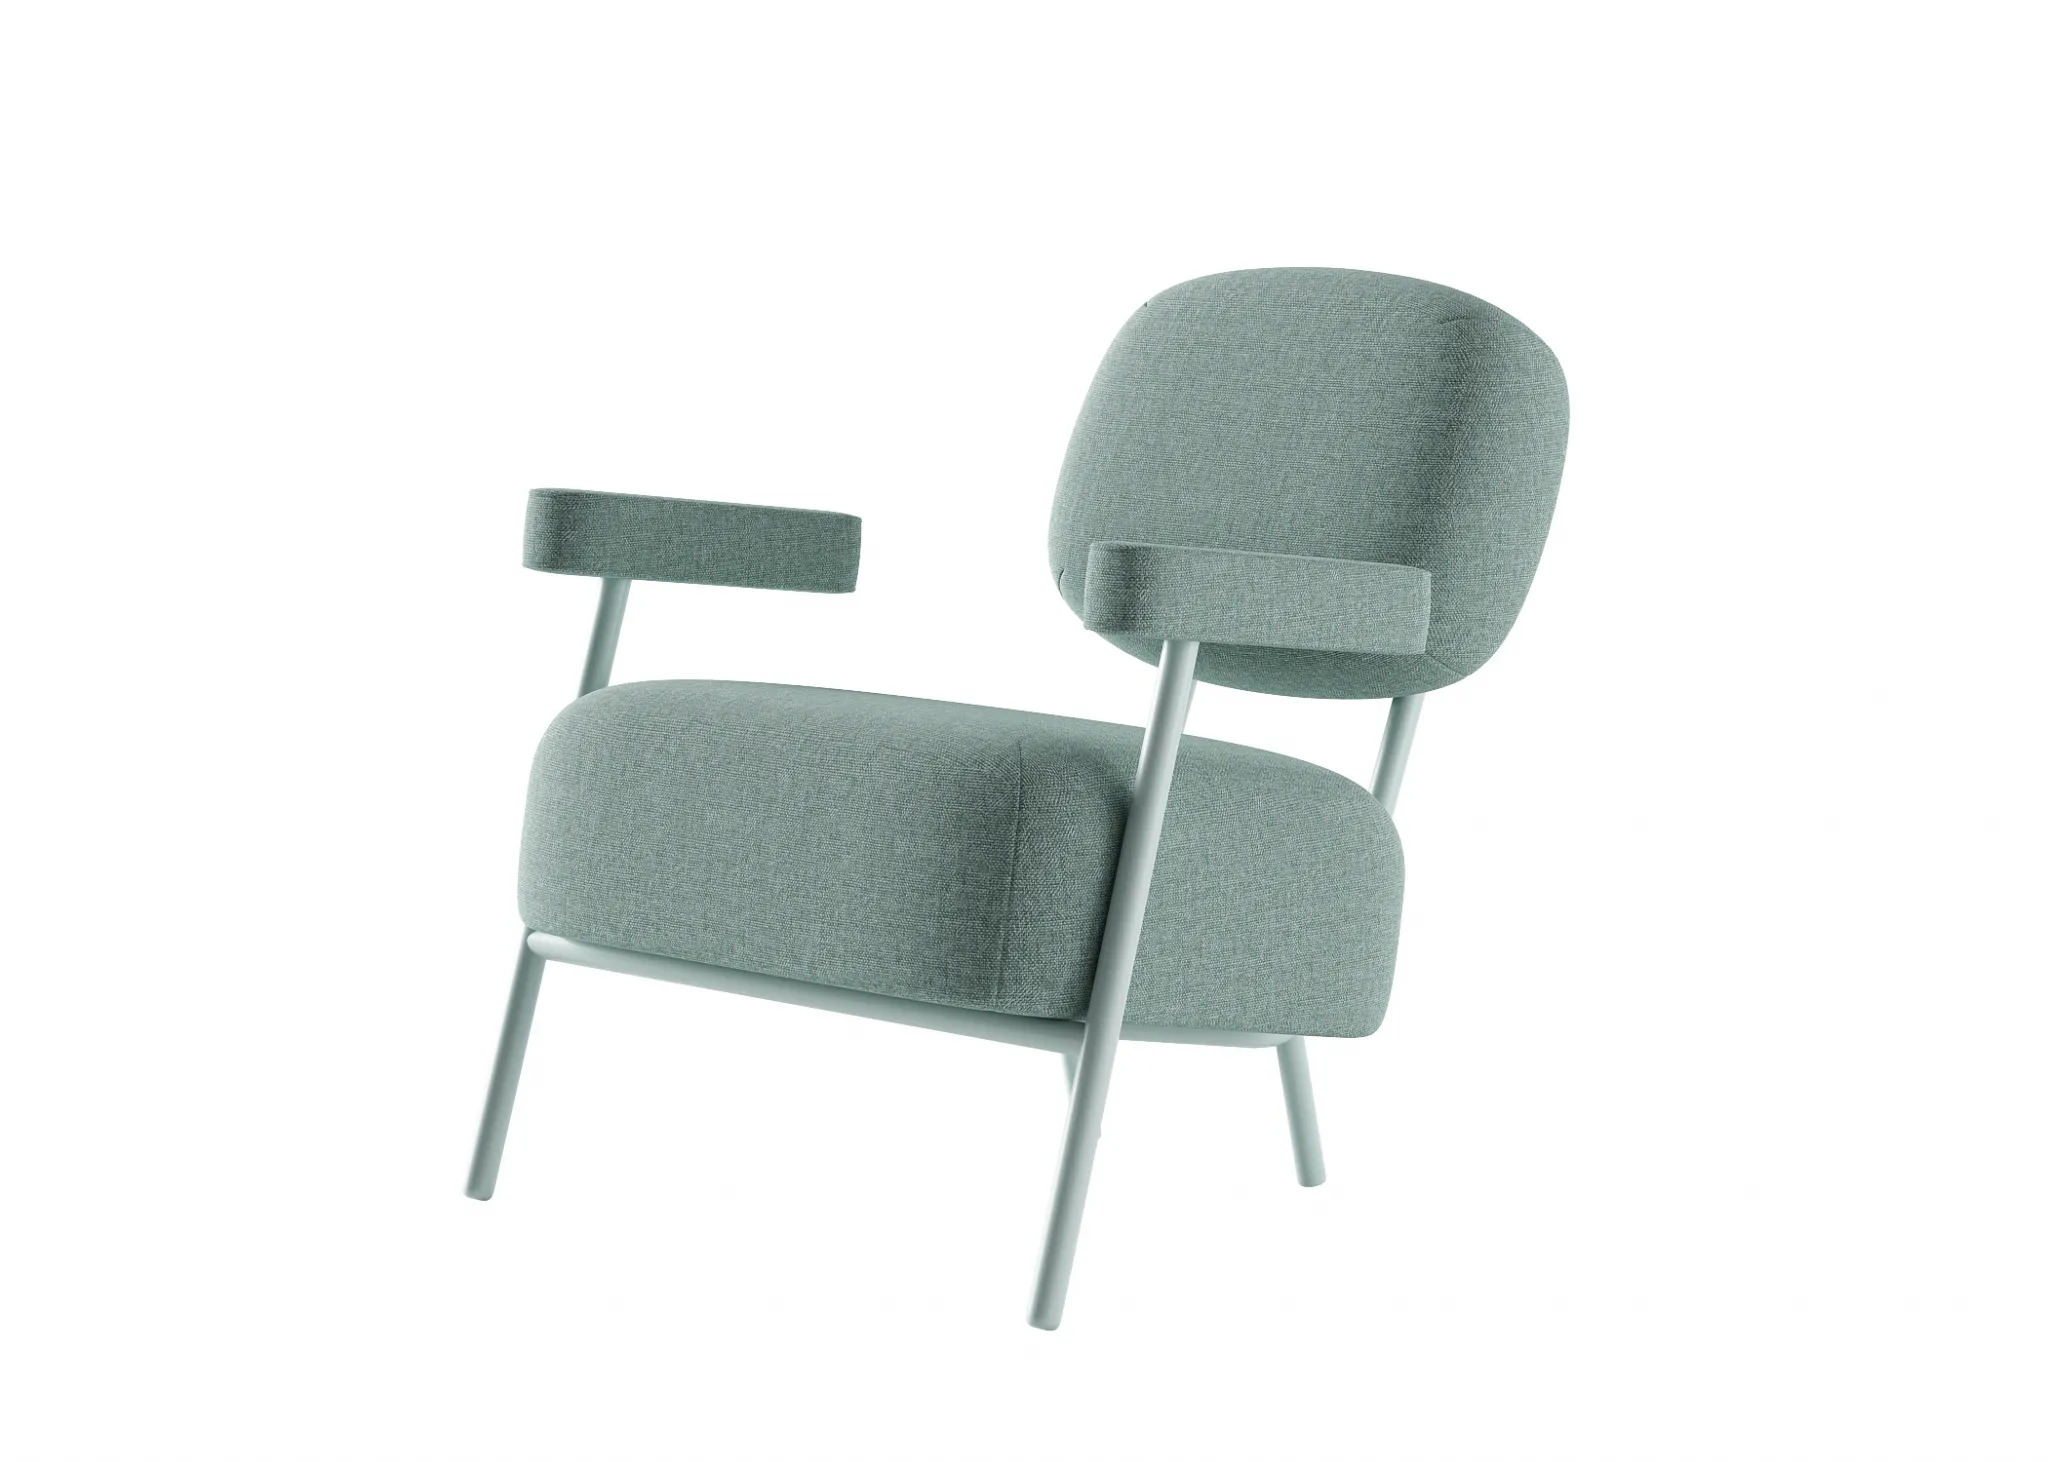 FURNITURE 3D MODELS – CHAIRS – 0018